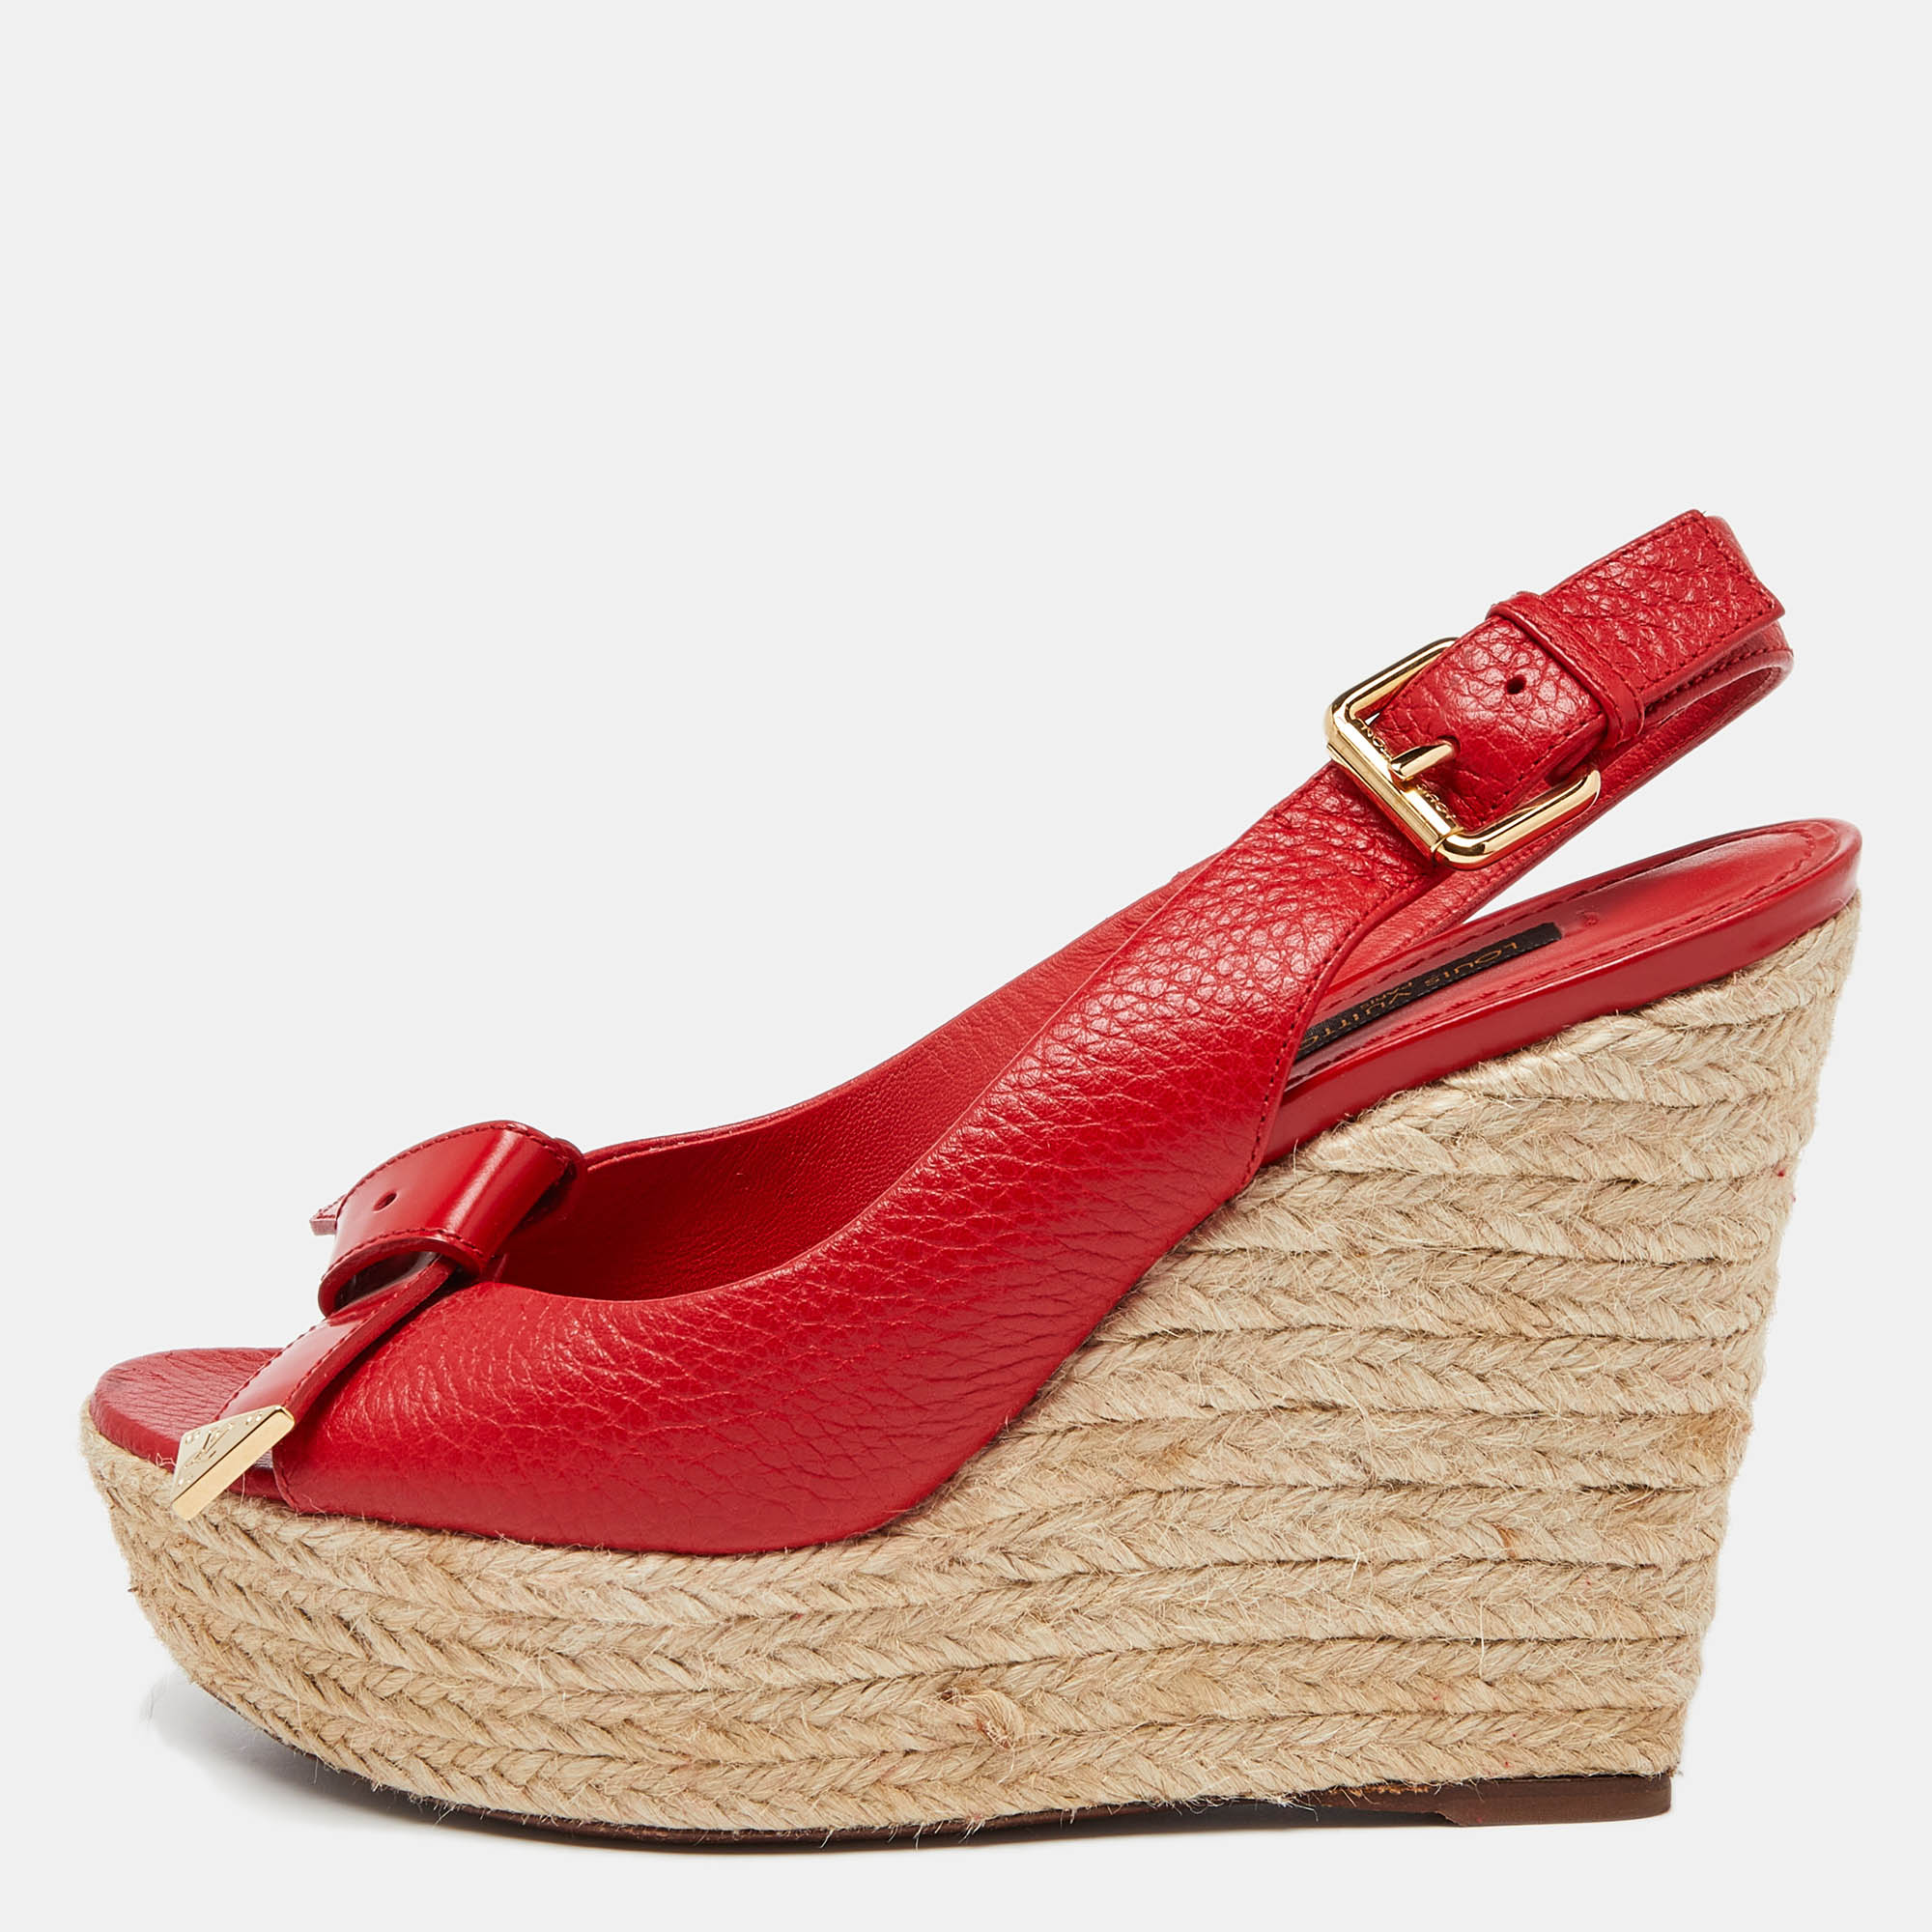 Pre-owned Louis Vuitton Red Leather Bow Open Toe Espadrille Wedge Platform Pumps Size 37